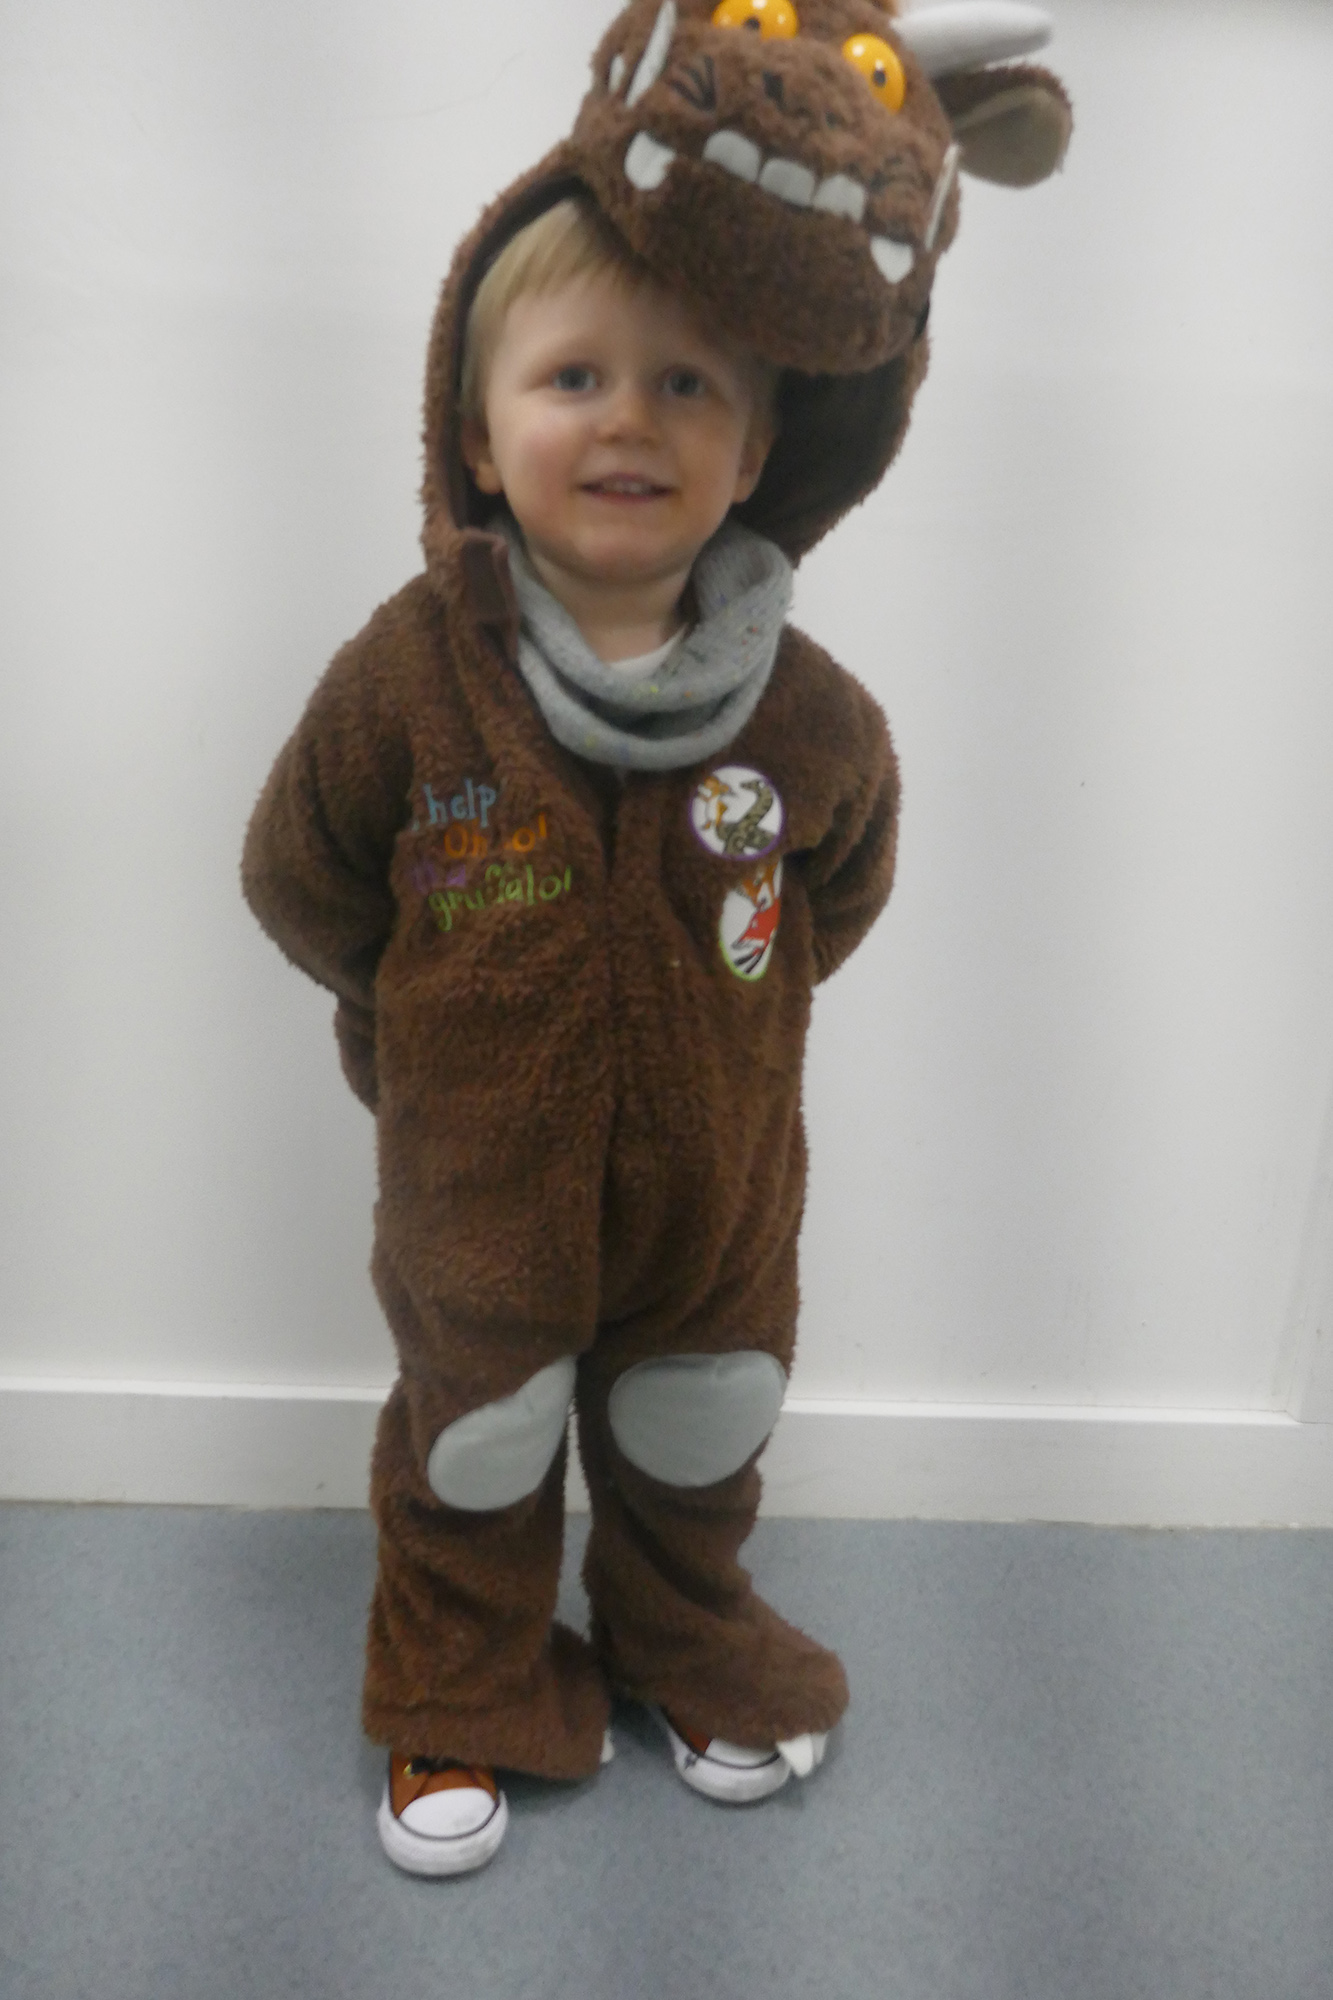 Child dressed as the Guffalo